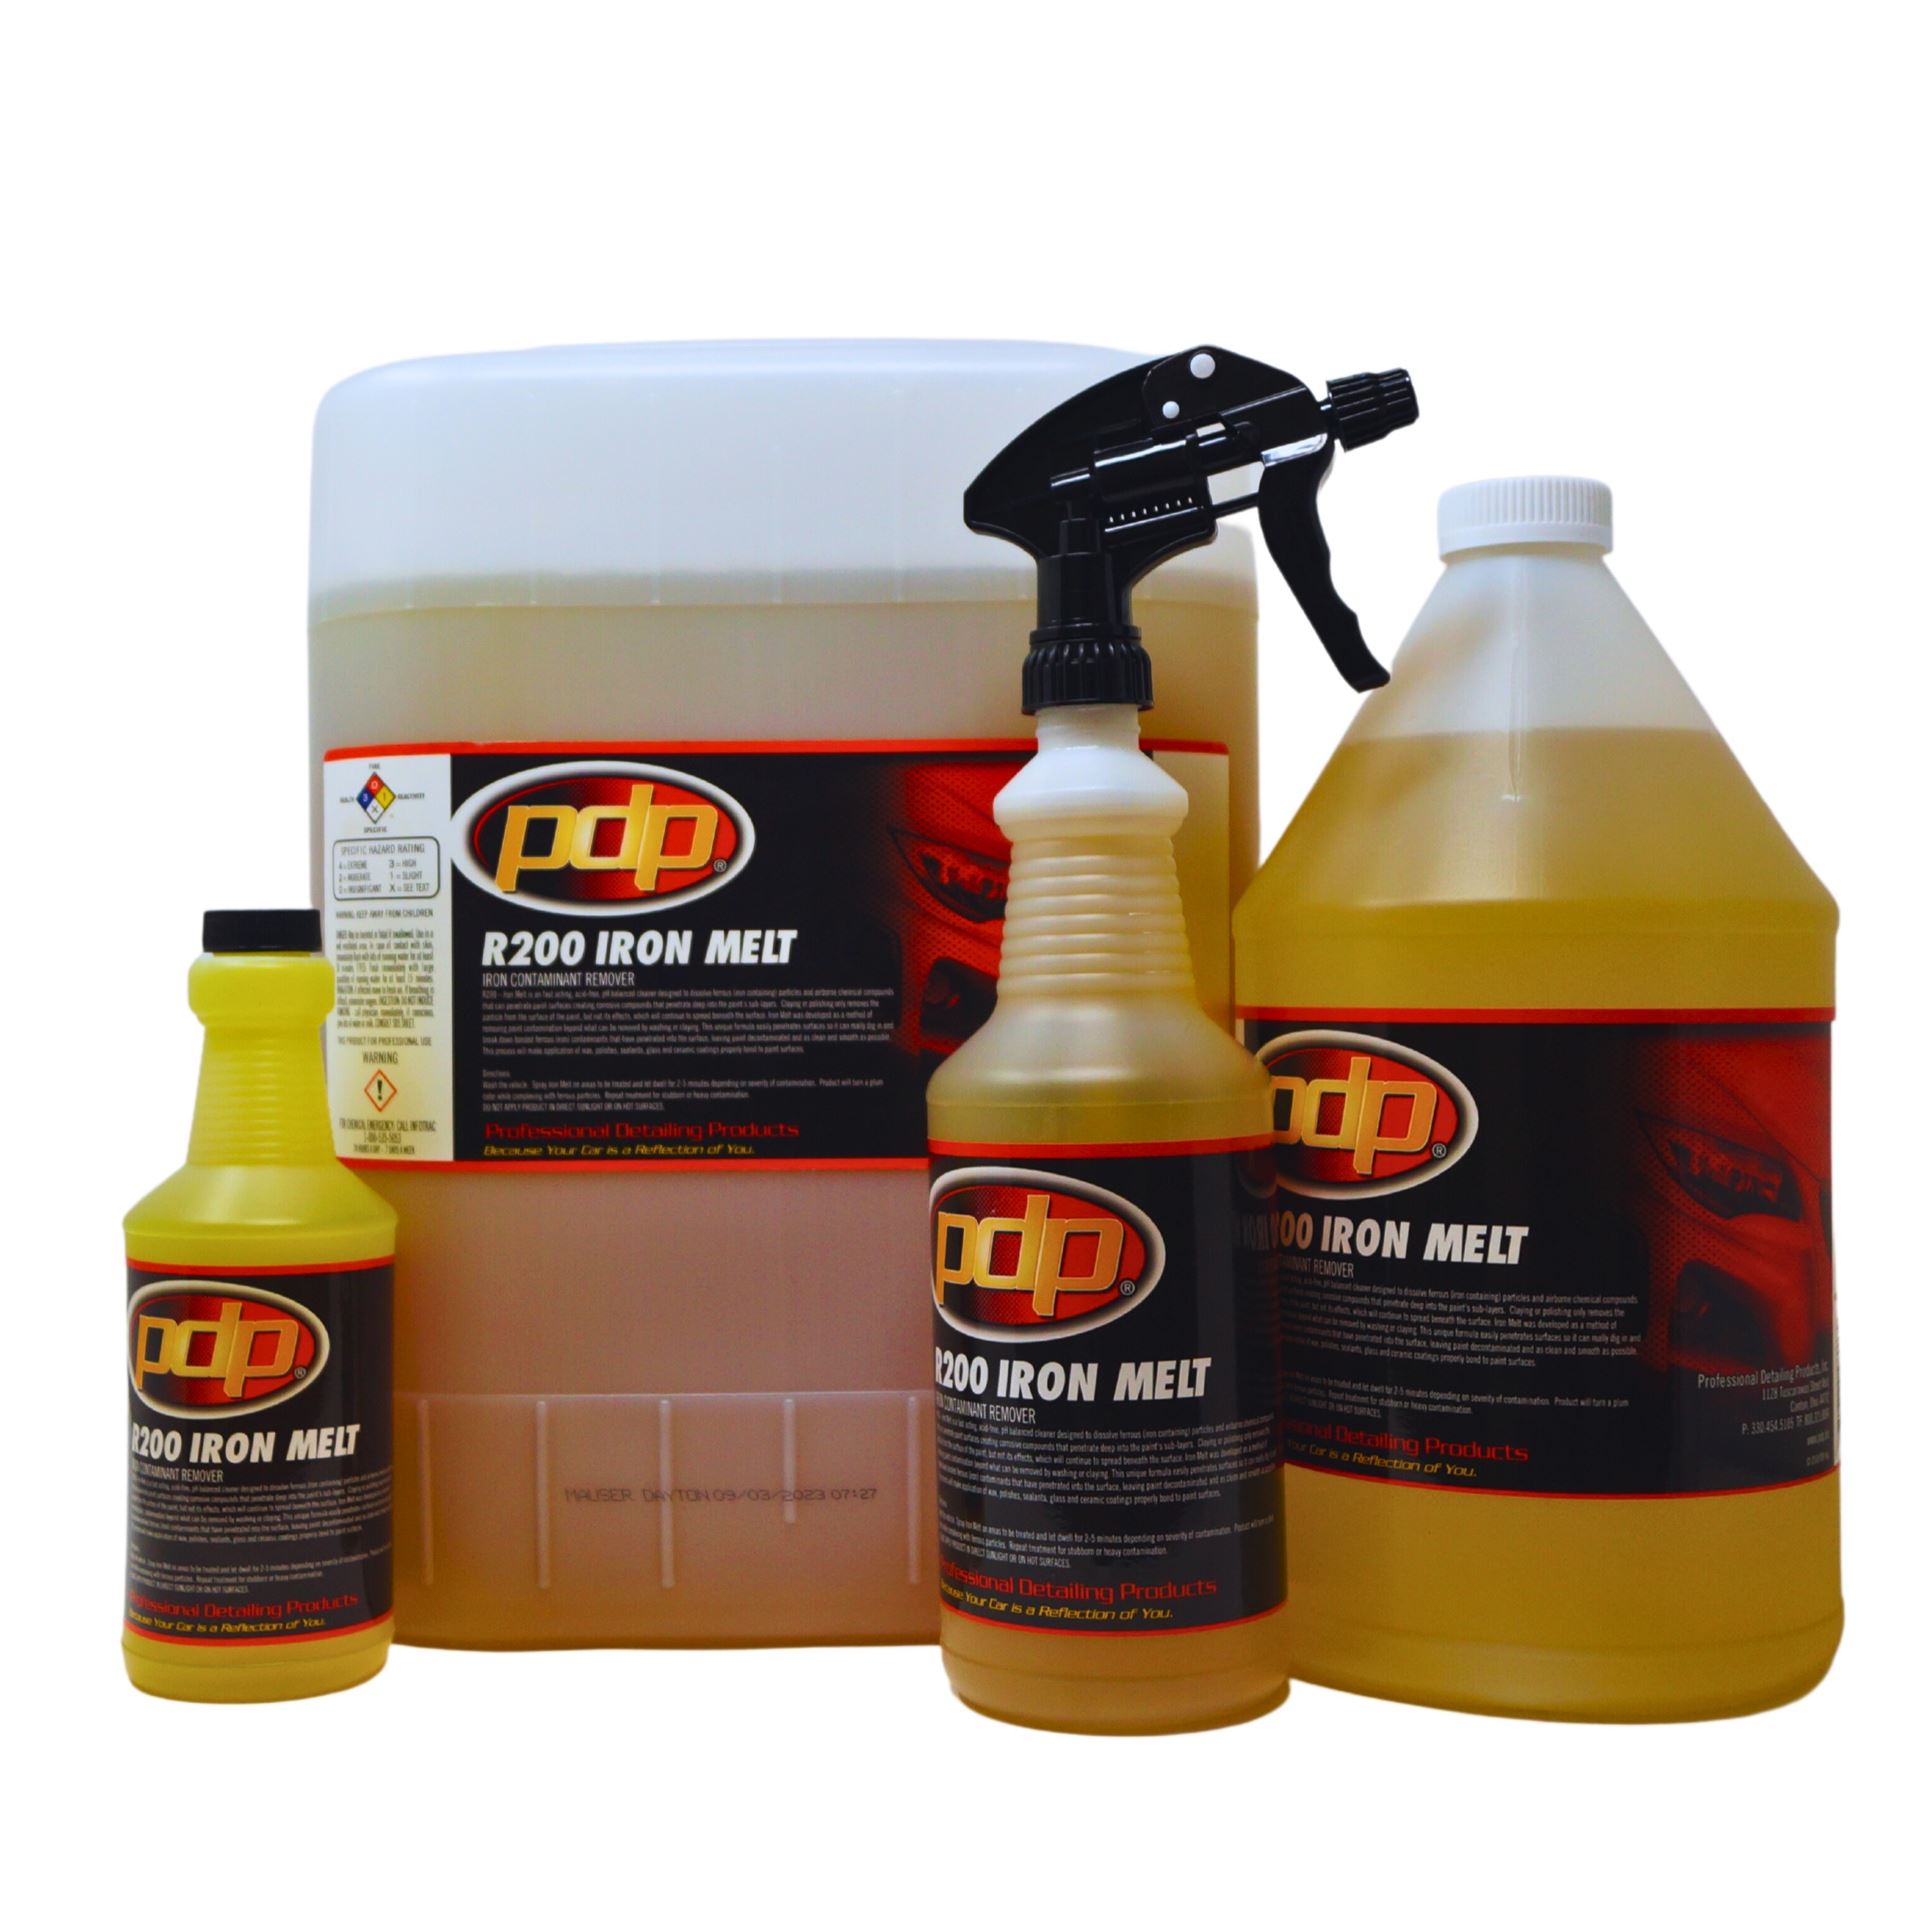 IRON MELT R200. Professional Detailing Products, Because Your Car is a  Reflection of You